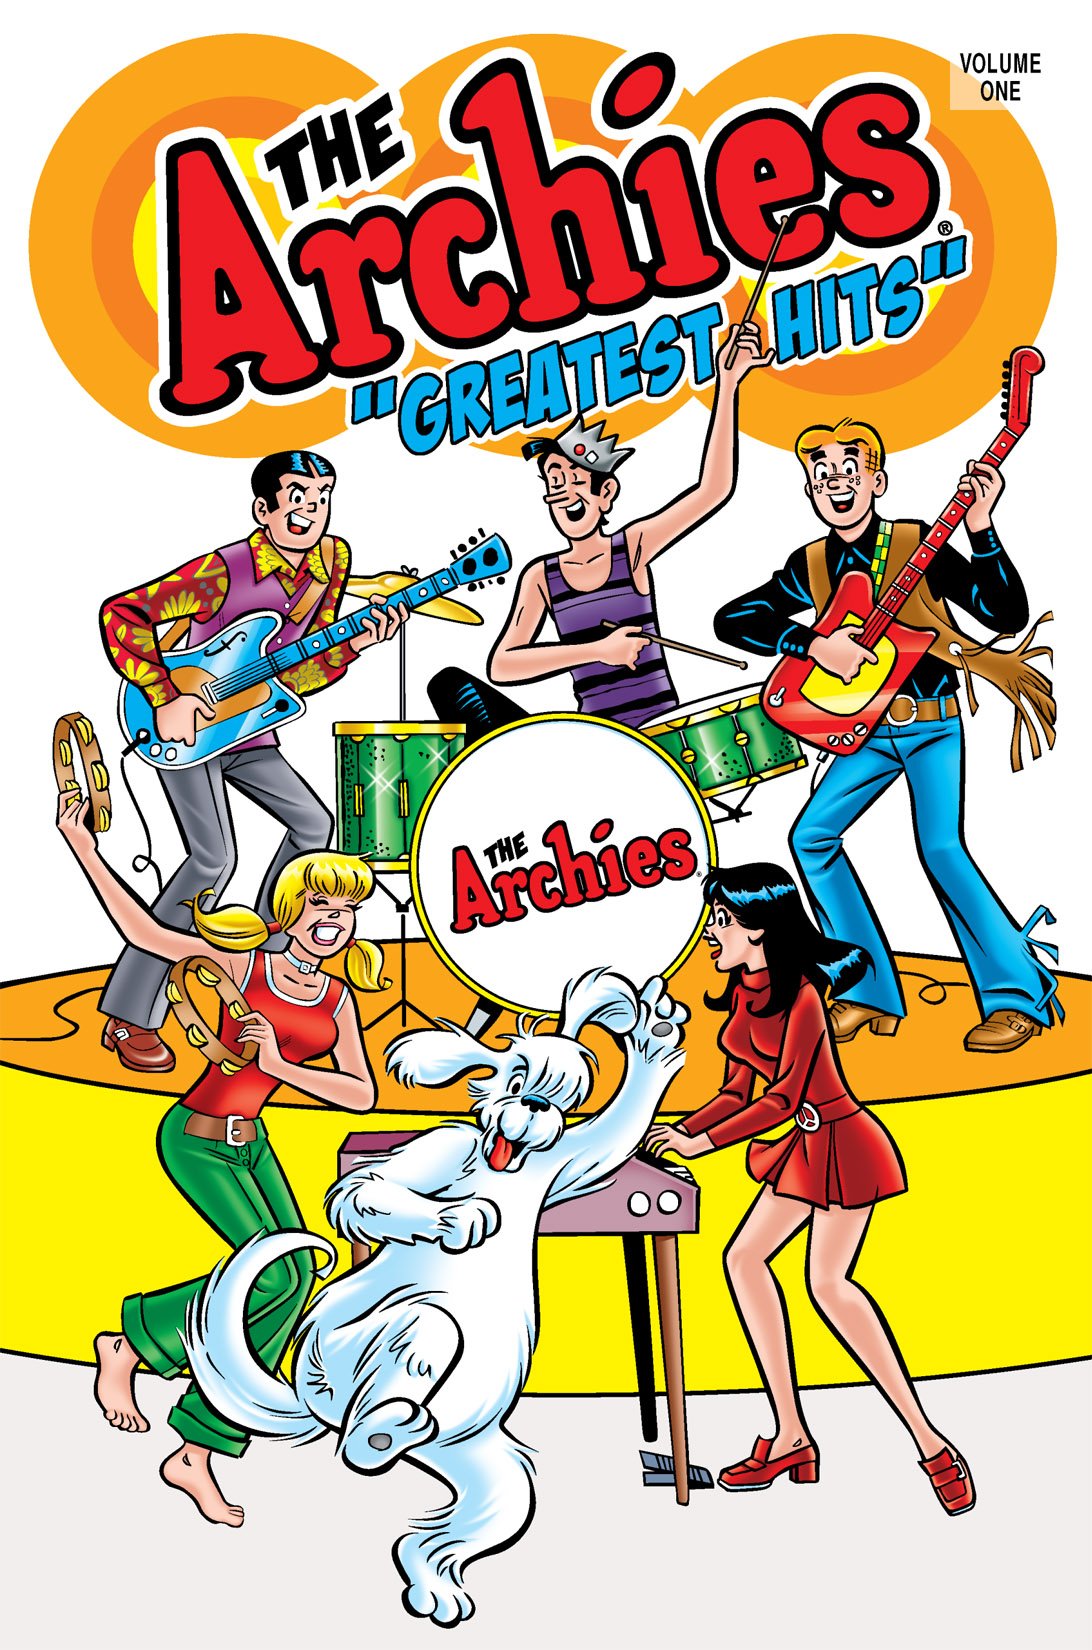 Read online The Archies: Greatest Hits comic -  Issue # TPB - 1